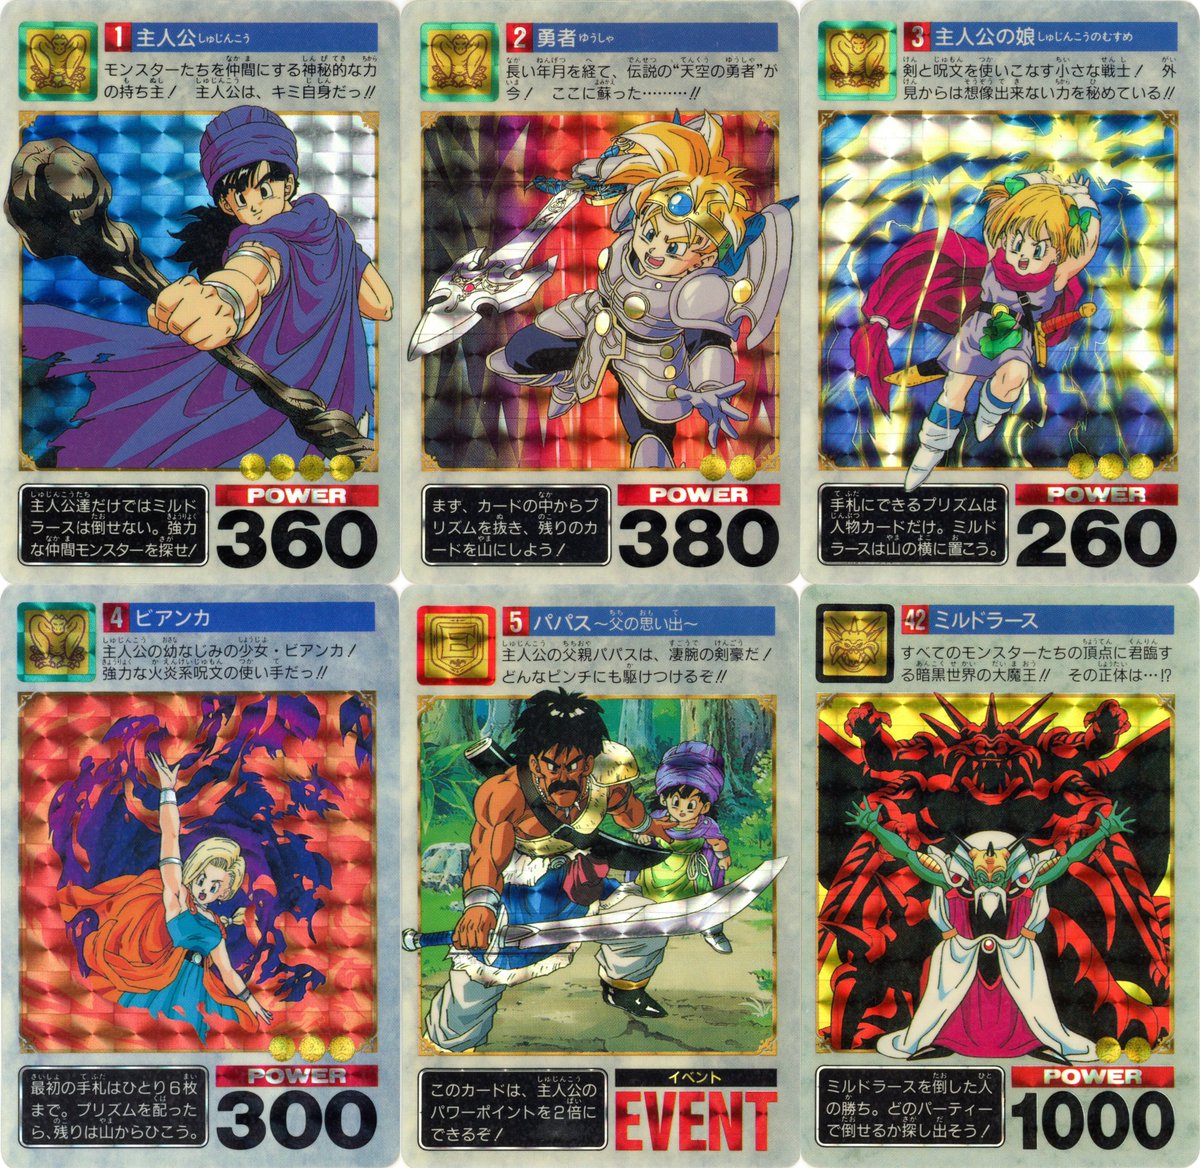 The 6 shiny cards from the first #DragonQuest V Carddass set are scanned. Unlike the #DQ Hero Abel set where the shiny cards are the first 6 (numerically), the shiny cards in this series are the first 5 and the last.